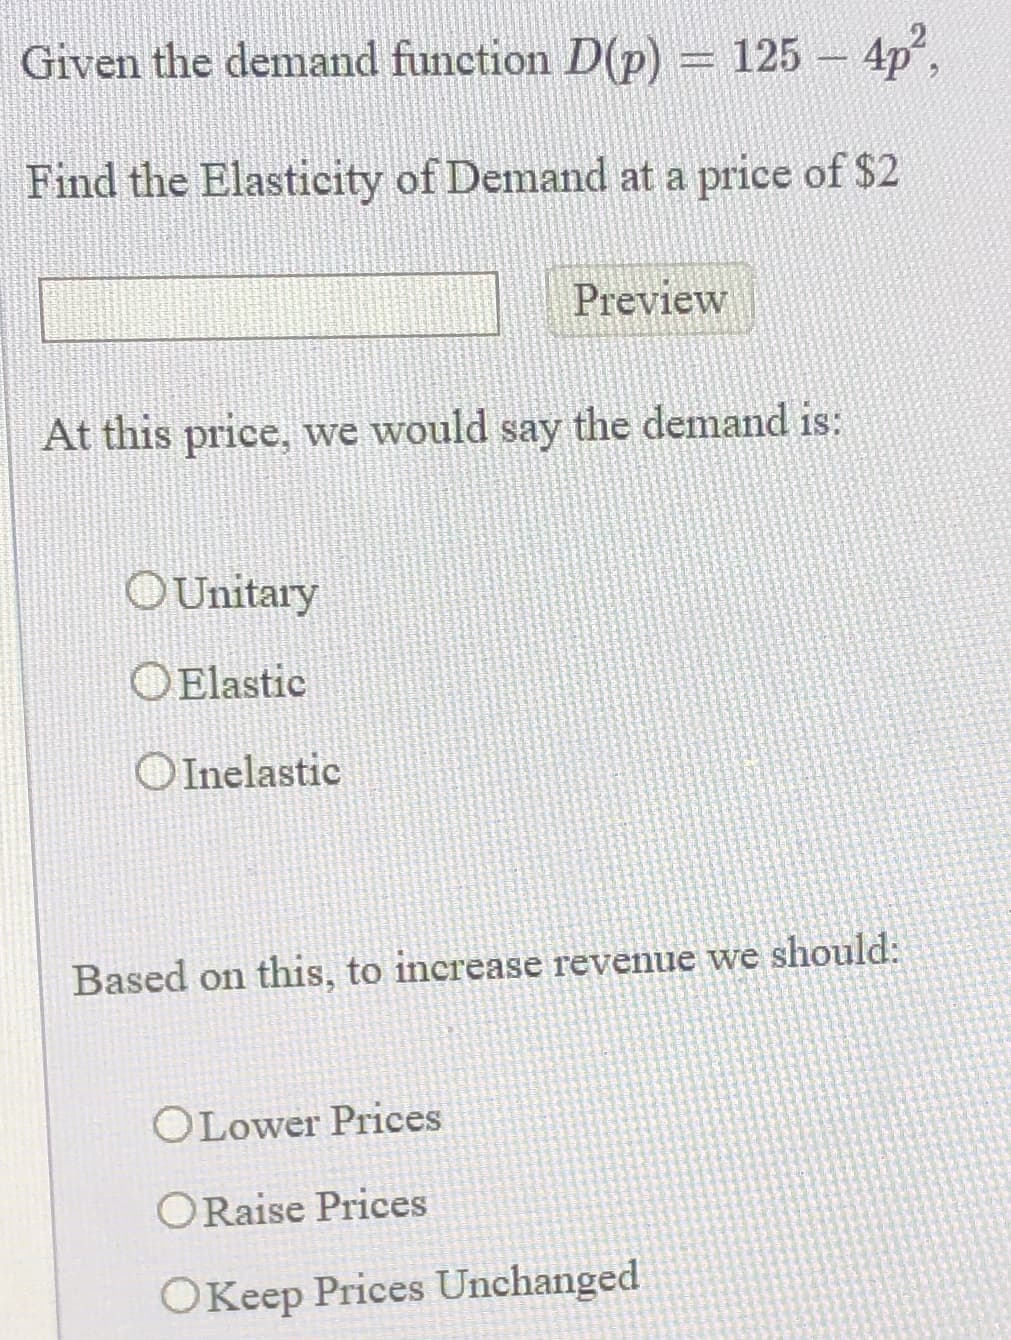 Given the demand function D(p) = 125 - 4p
Find the Elasticity of Demand at a price of $2
Preview
At this price, we would say the demand is:
OUnitary
OElastic
OInelastic
Based on this, to increase revenue we should:
OLower Prices
ORaise Prices
OKeep Prices Unchanged
